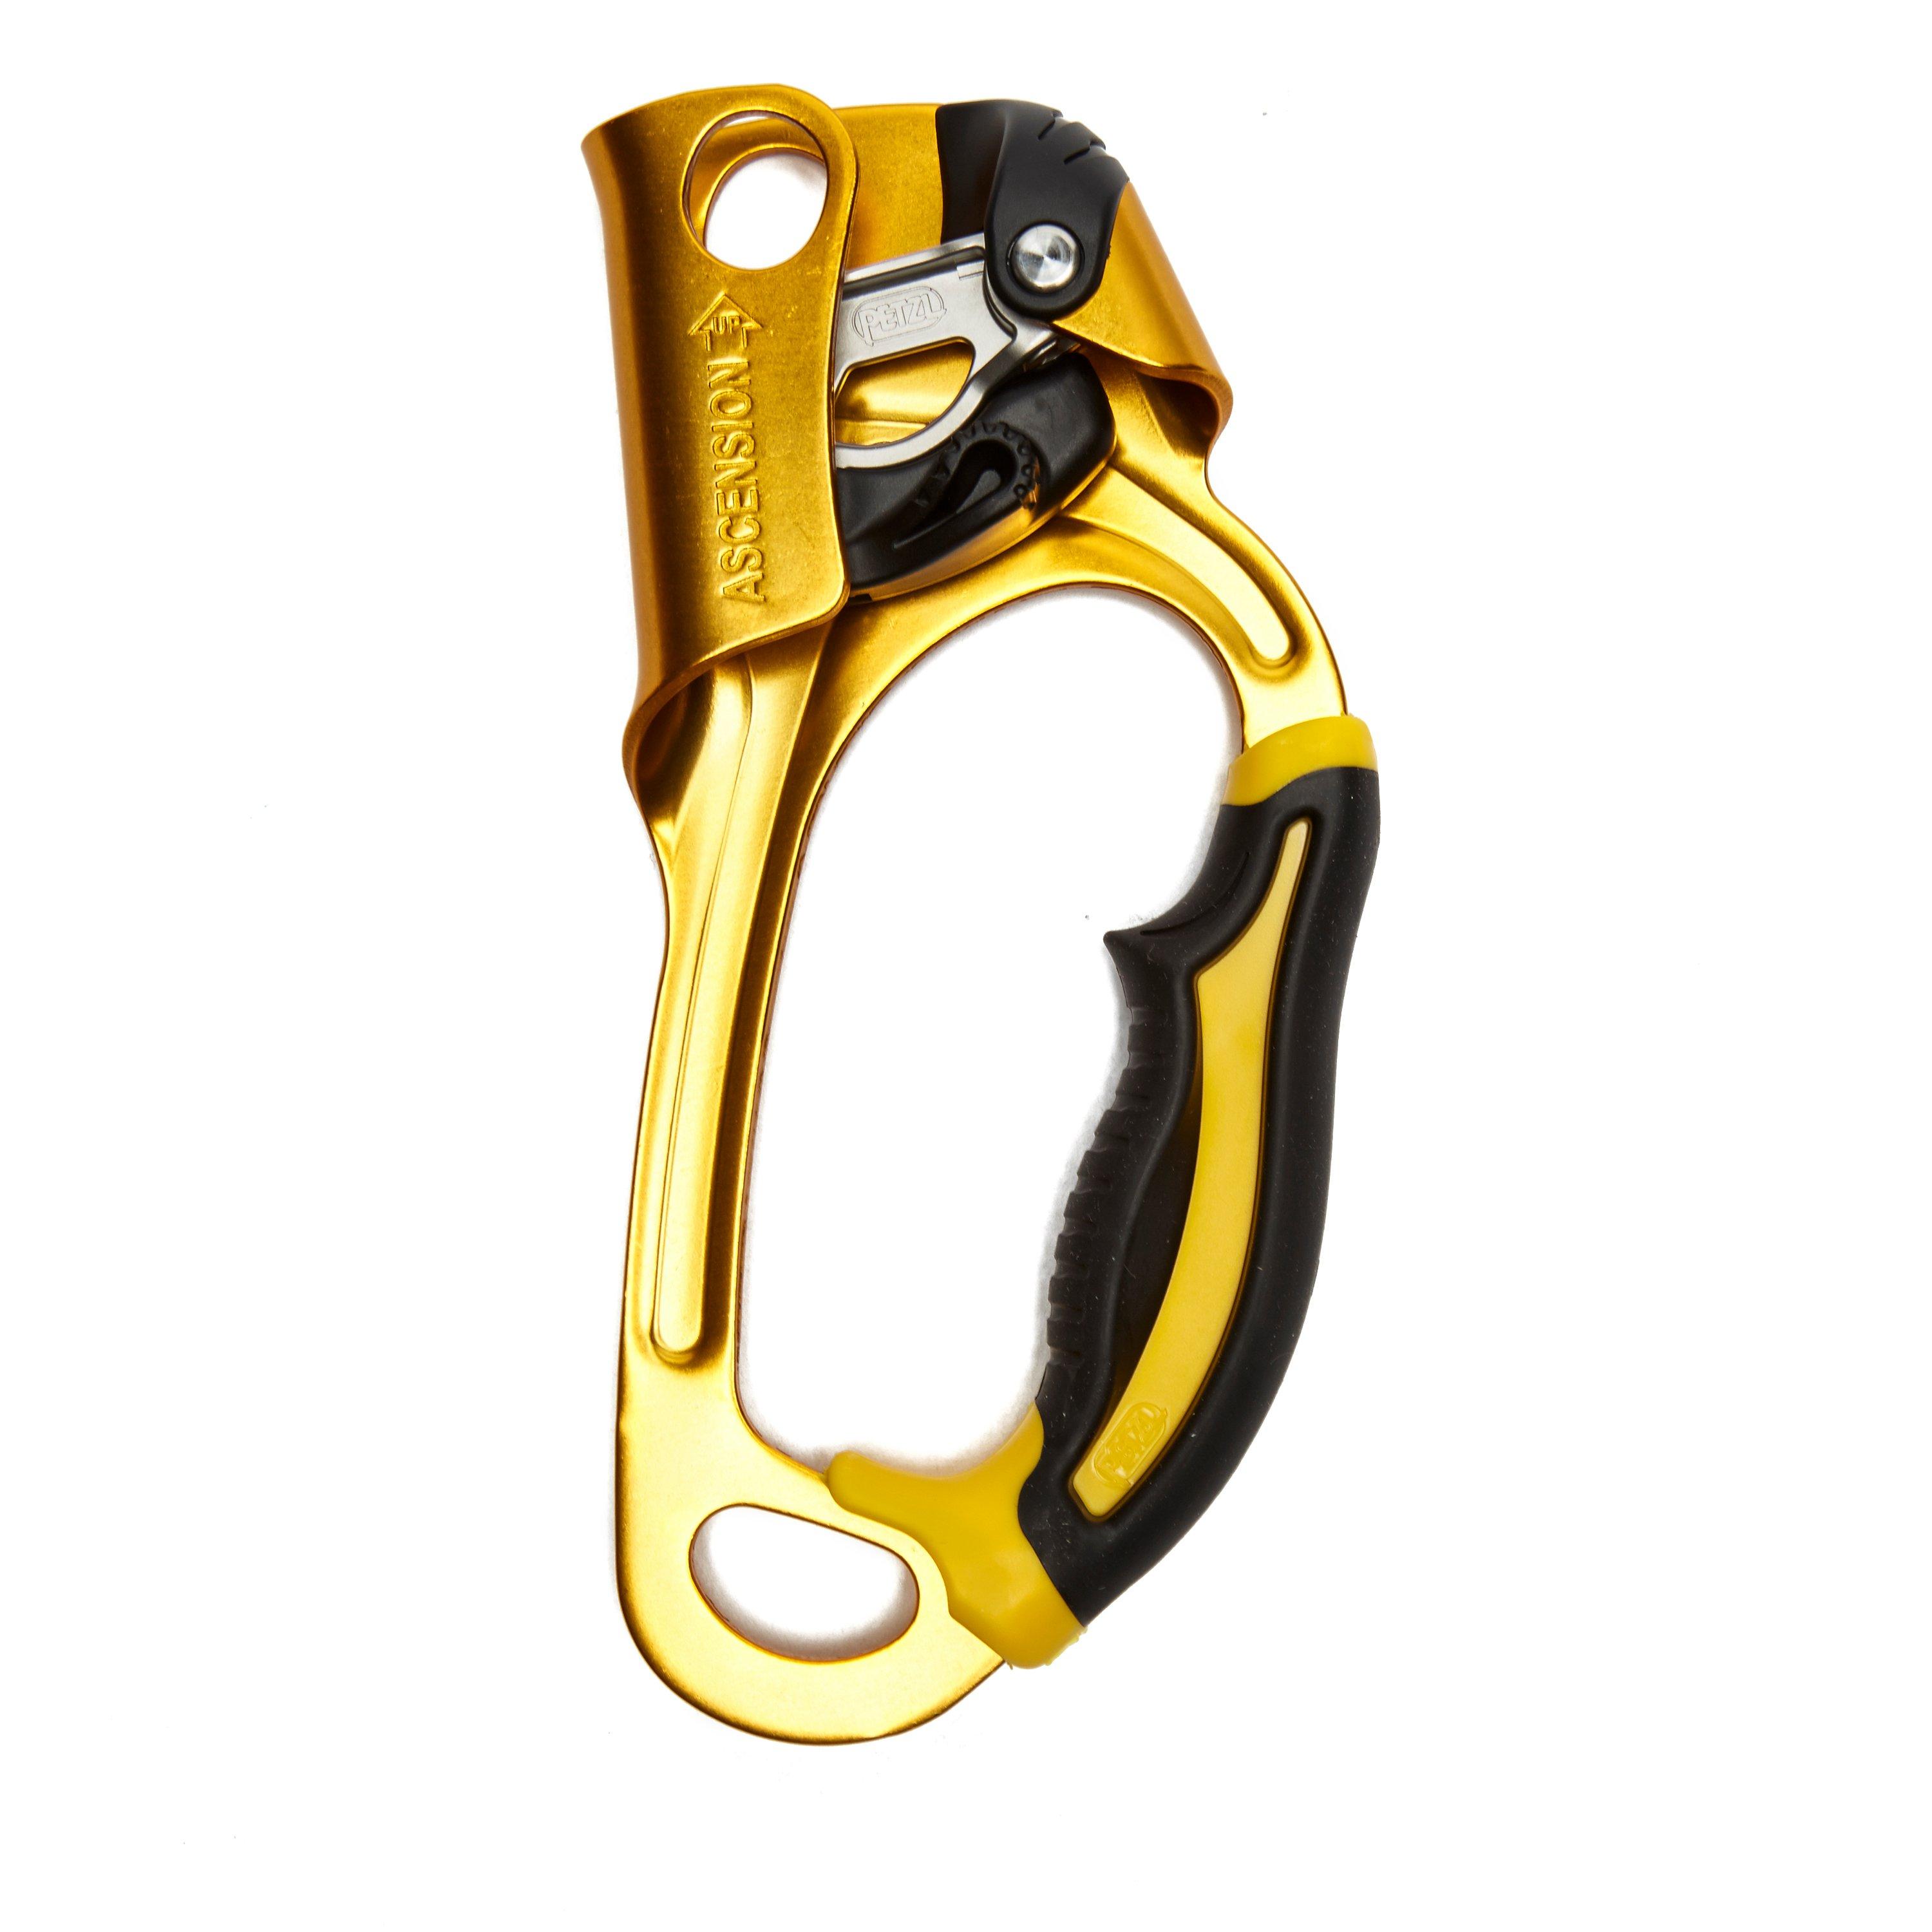 Petzl Petzl Ascension Right Hand Ascender - Yellow, Yellow